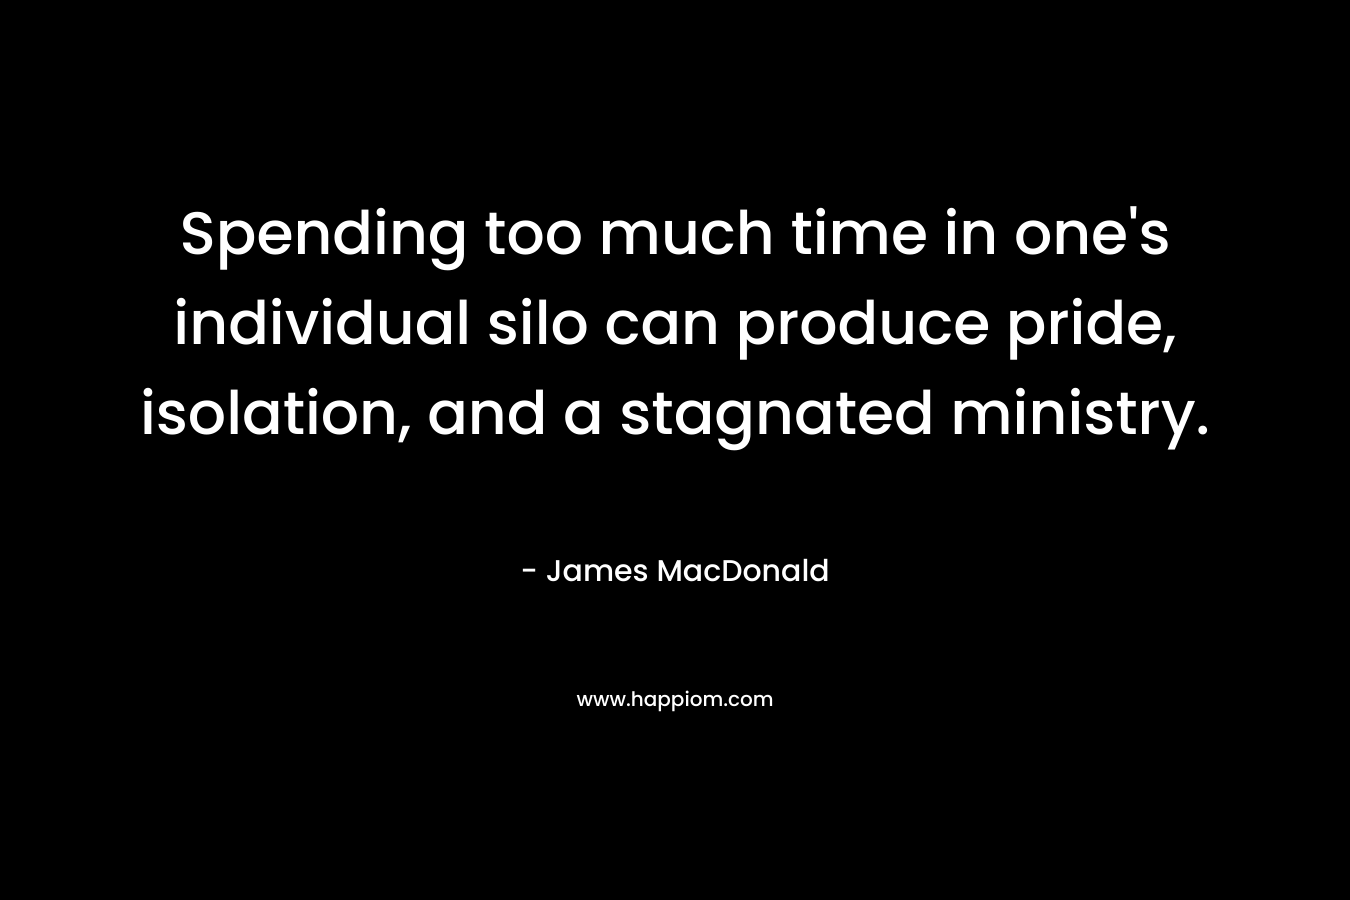 Spending too much time in one’s individual silo can produce pride, isolation, and a stagnated ministry. – James MacDonald